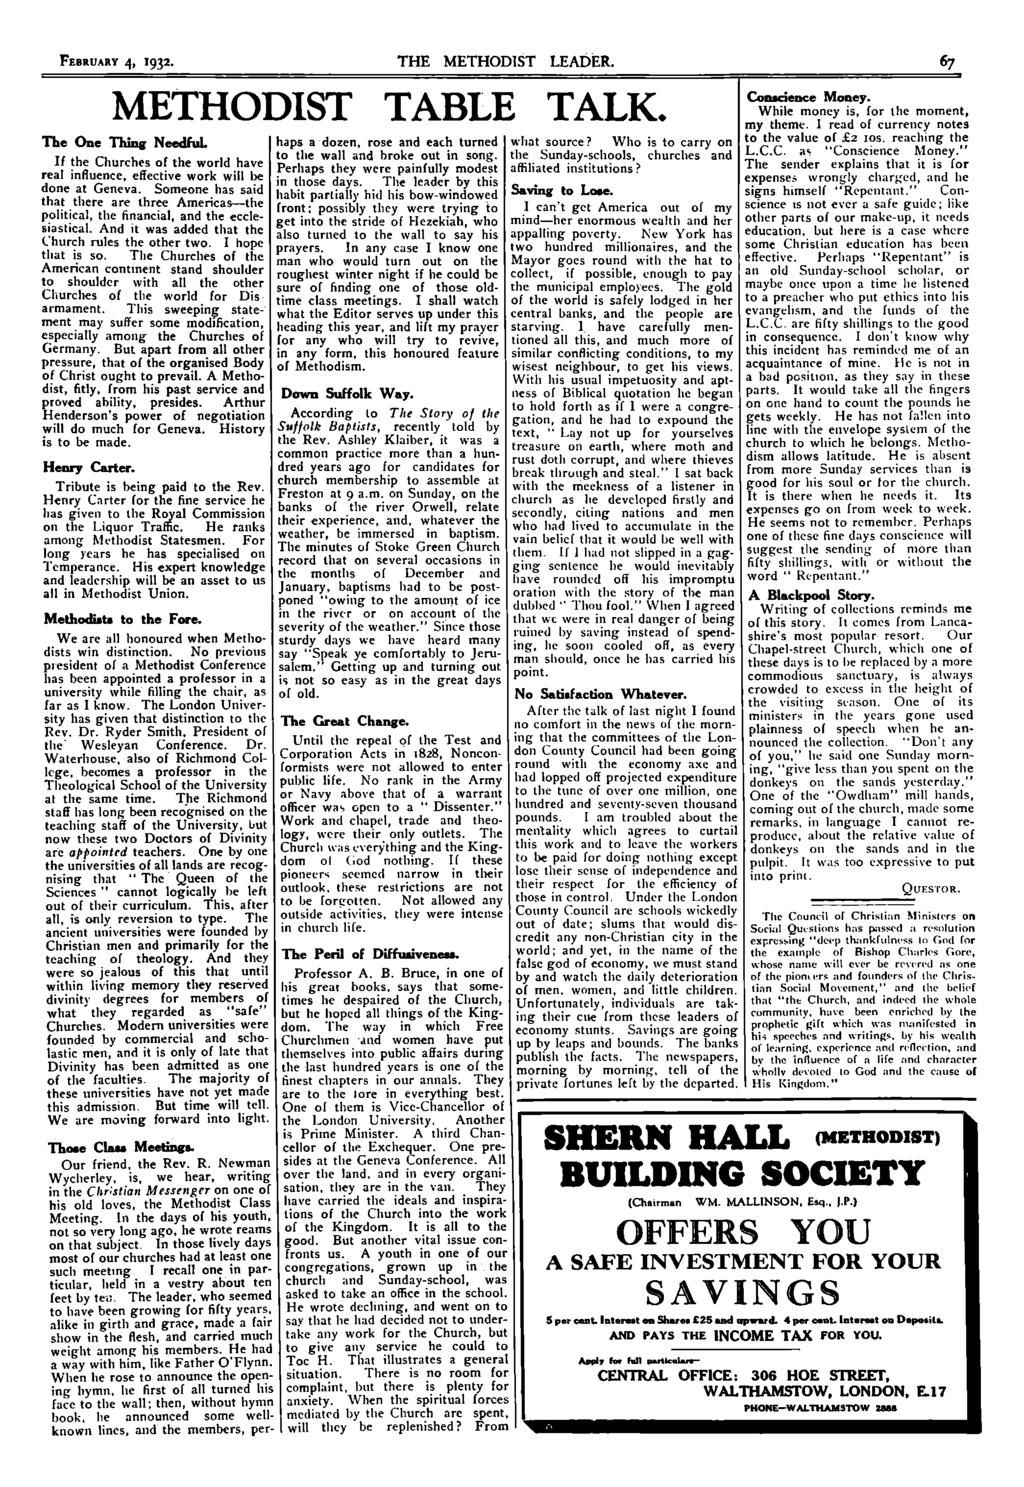 FEBRUARY 4, 1932. THE METHODIST LEADER. 67 METHODIST TABLE TALK. The One Thing Needful. If the Churches of the world have real influence, effective work will be done at Geneva.